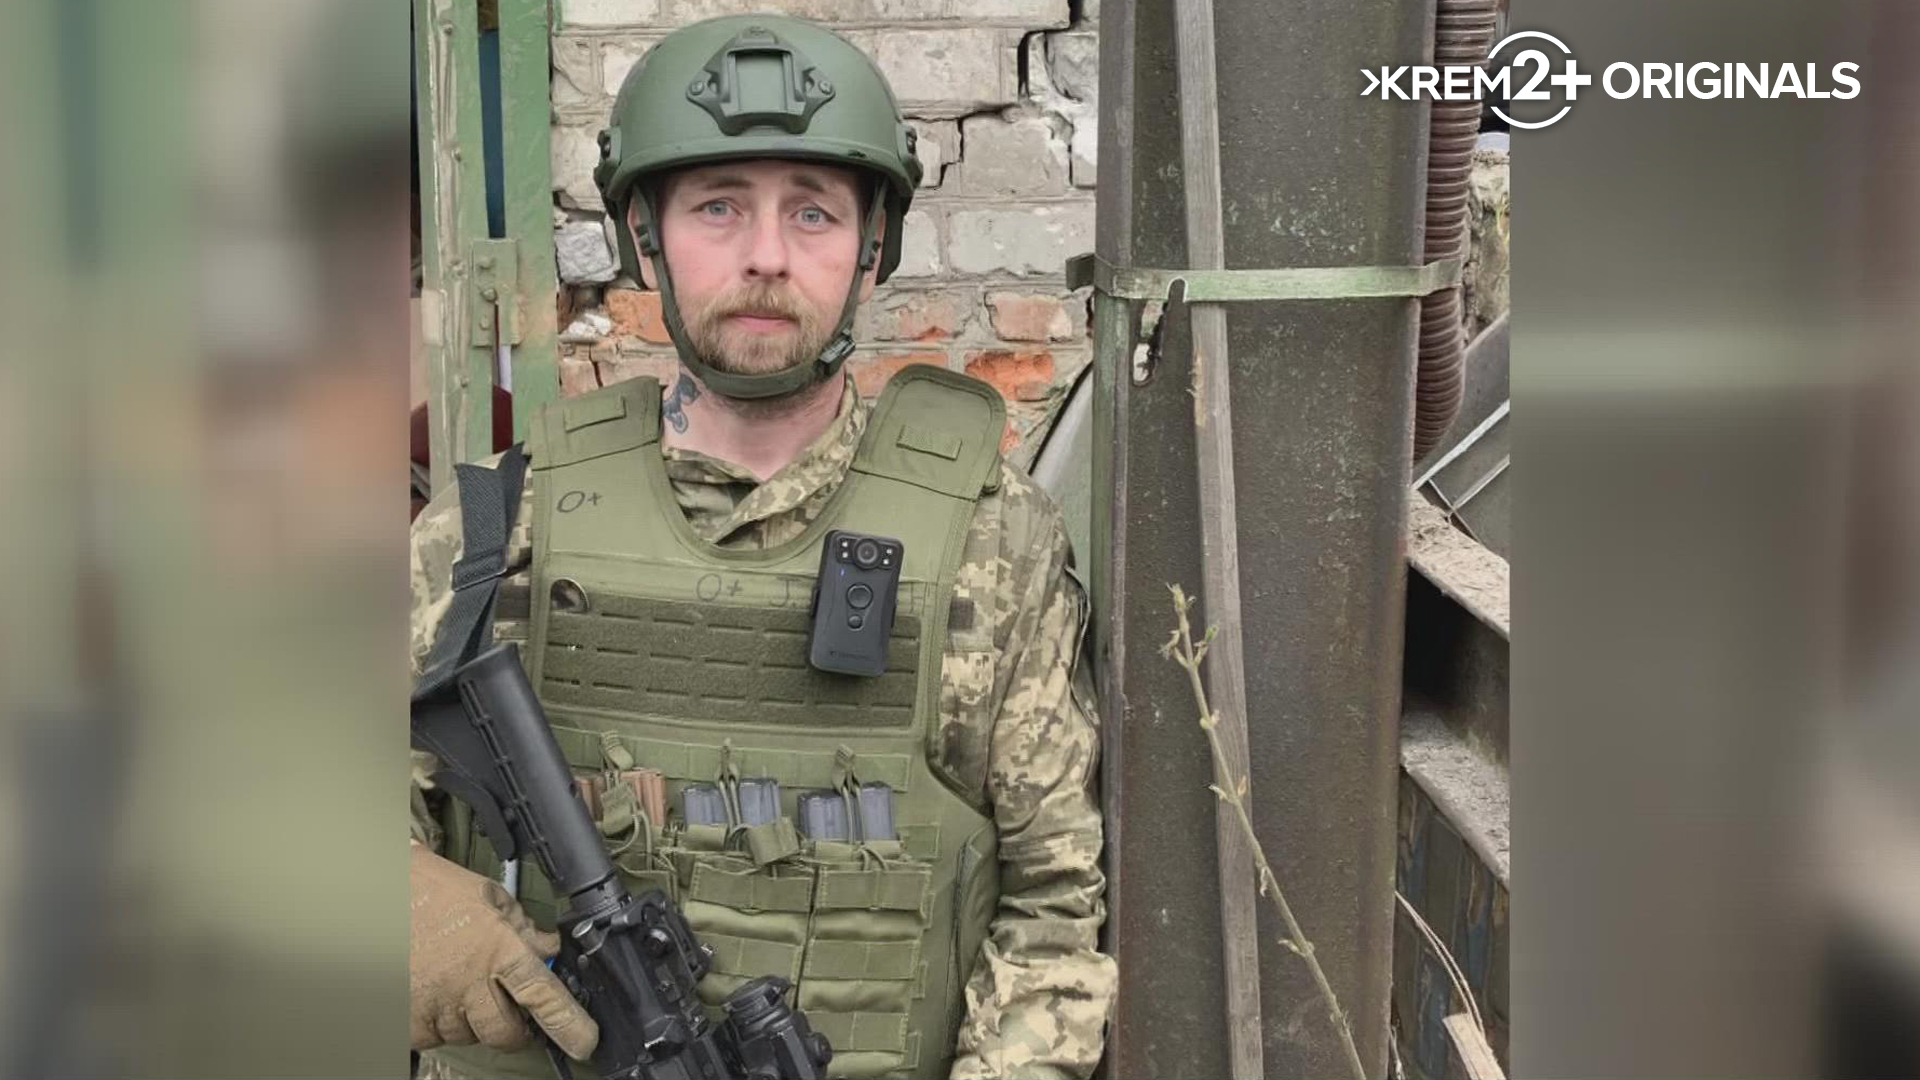 Jeremy Smith spent more than a month guarding a makeshift base in Ukraine. After his return, he spoke exclusively with KREM 2 about the experience.